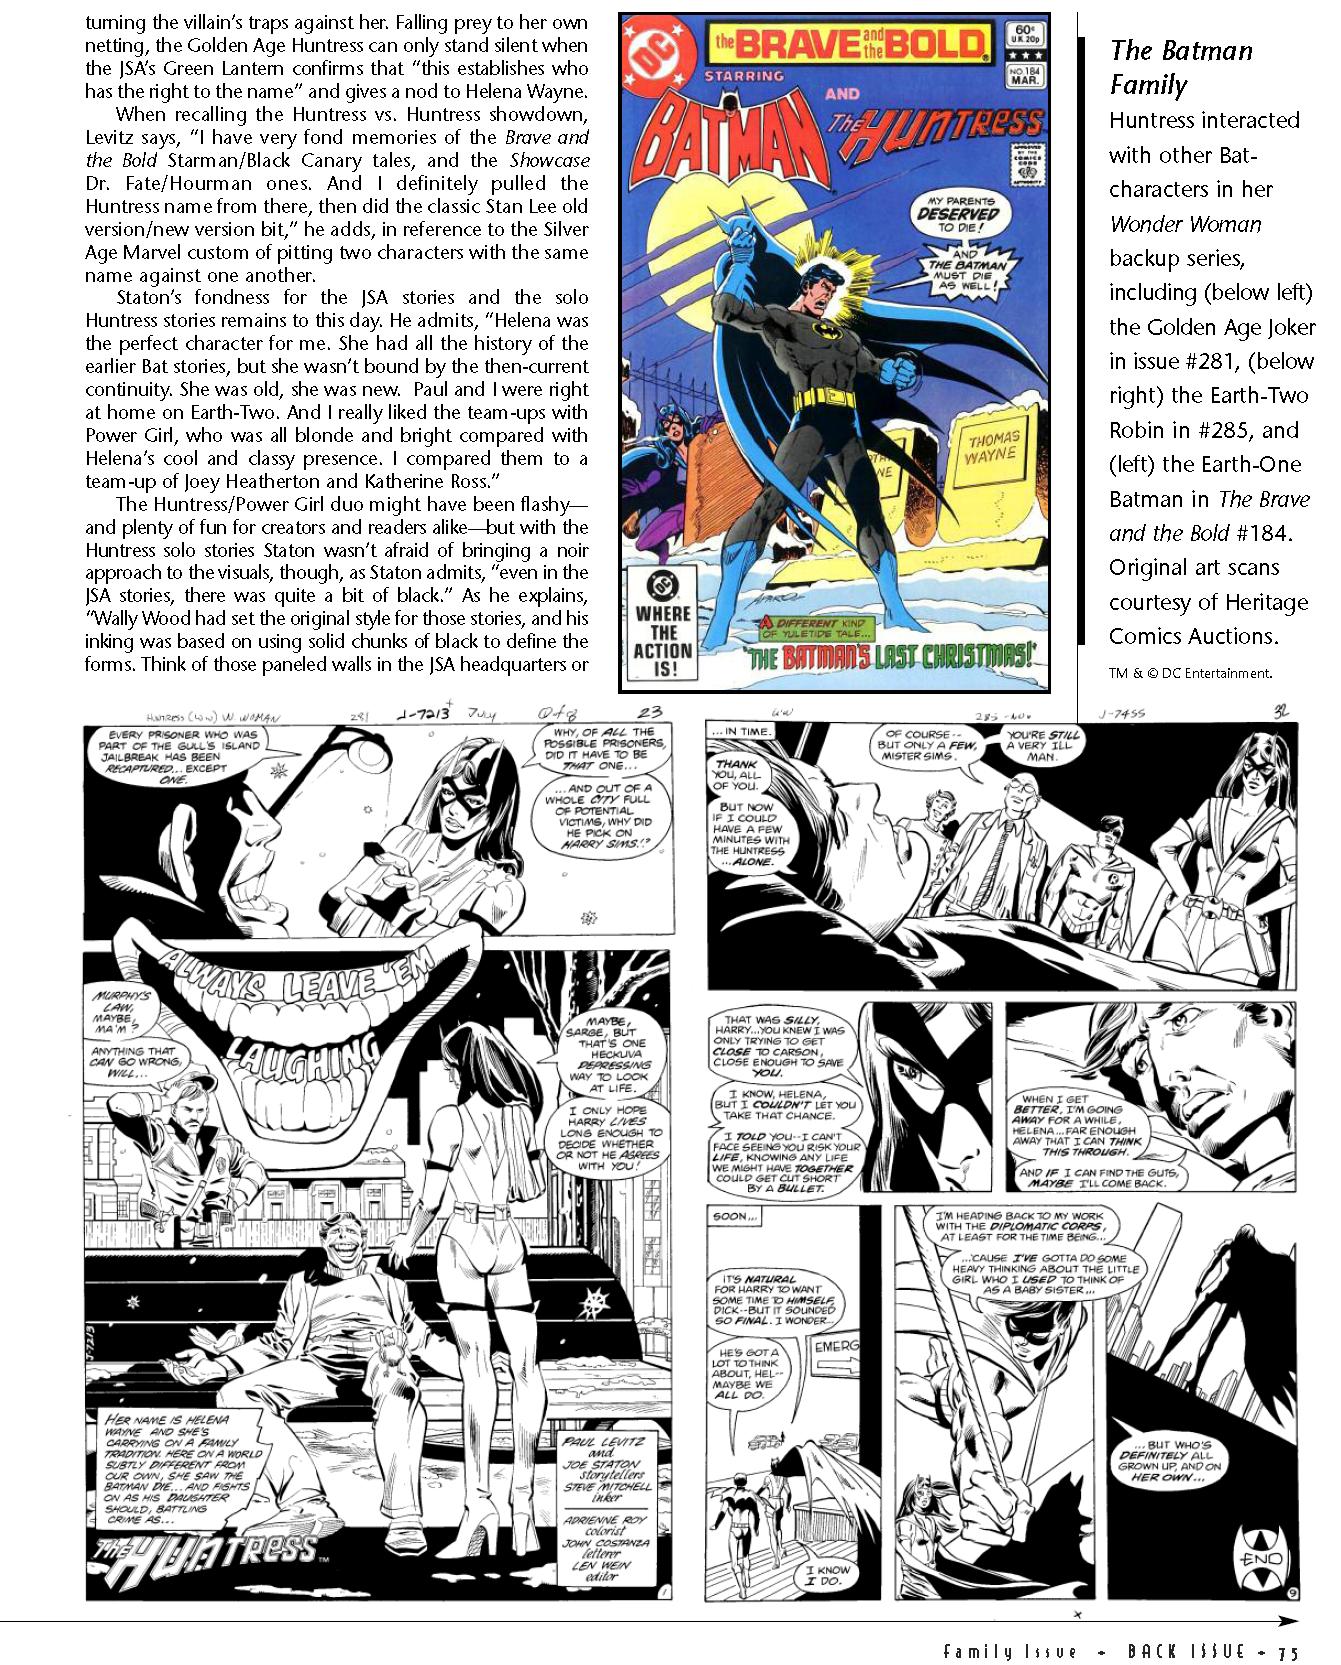 Read online Back Issue comic -  Issue #38 - 77